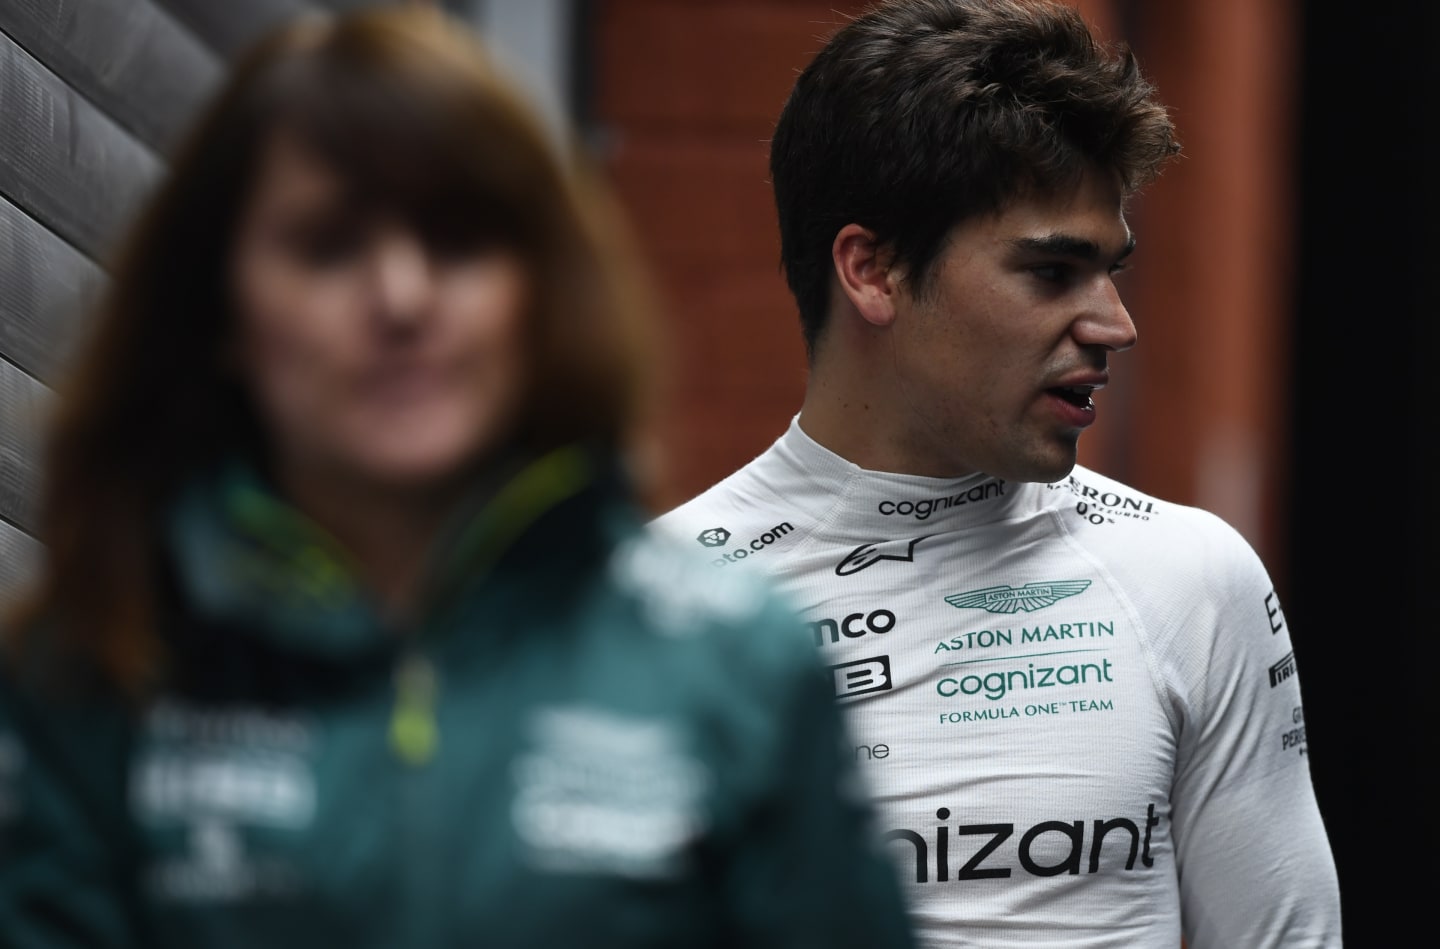 SPA, BELGIUM - AUGUST 27: 14th place qualifier Lance Stroll of Canada and Aston Martin F1 Team walks in the Paddock during qualifying ahead of the F1 Grand Prix of Belgium at Circuit de Spa-Francorchamps on August 27, 2022 in Spa, Belgium. (Photo by Rudy Carezzevoli/Getty Images)